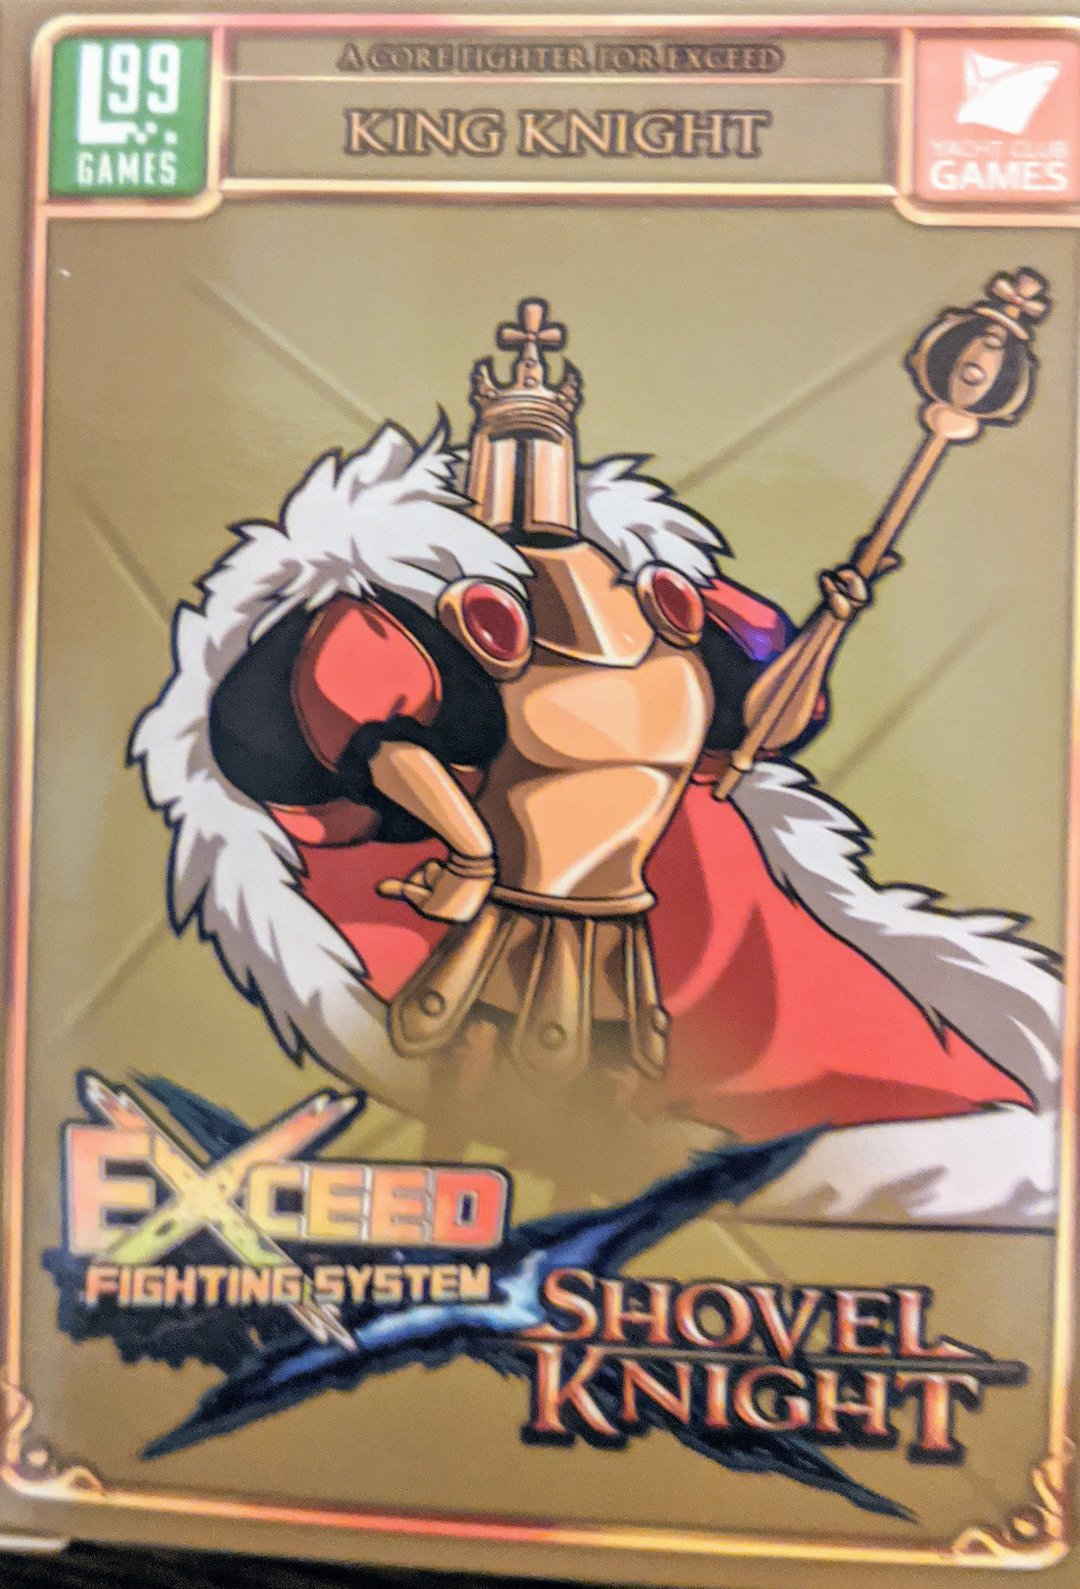 exceed shovel knight king